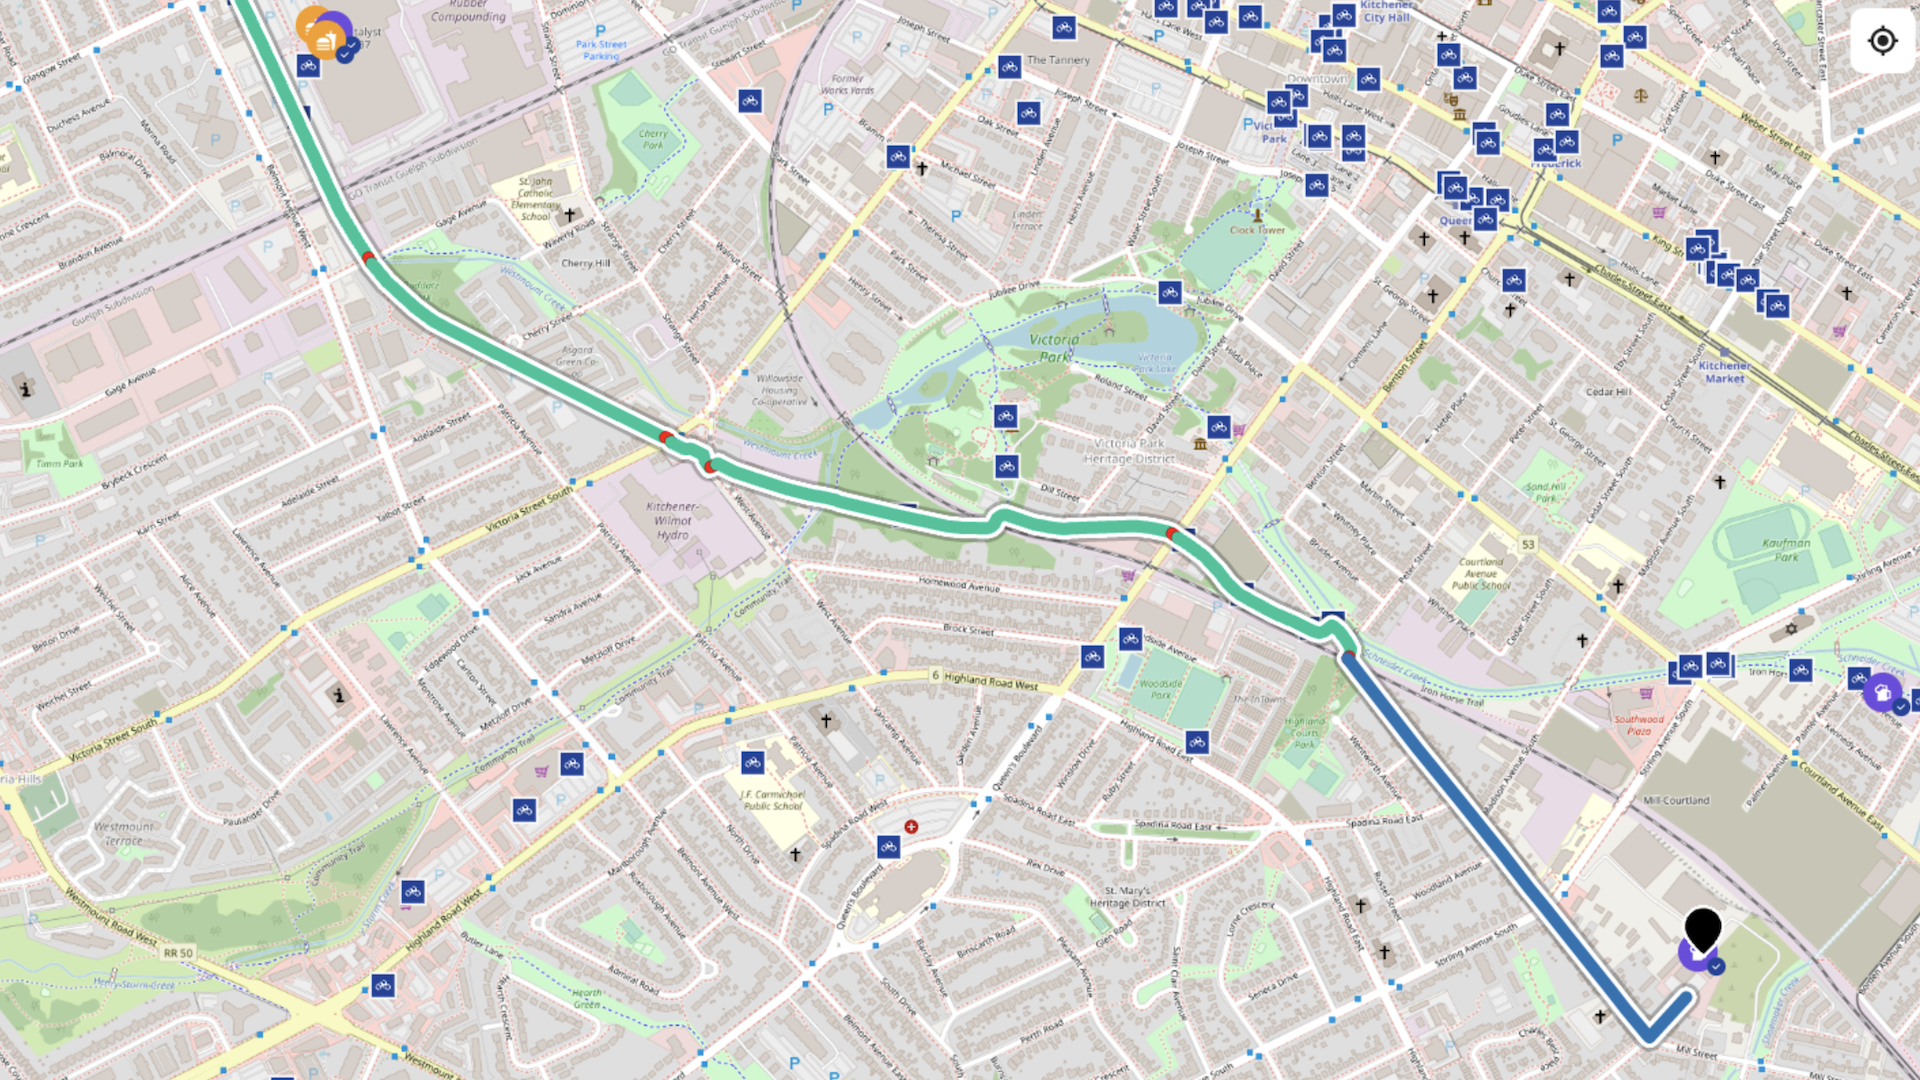 A street map shows part of Kitchener and Waterloo. There's a route trace that's mostly green and blue going from top left to bottom right. There are many small blue retables with white bike icons marked on them.